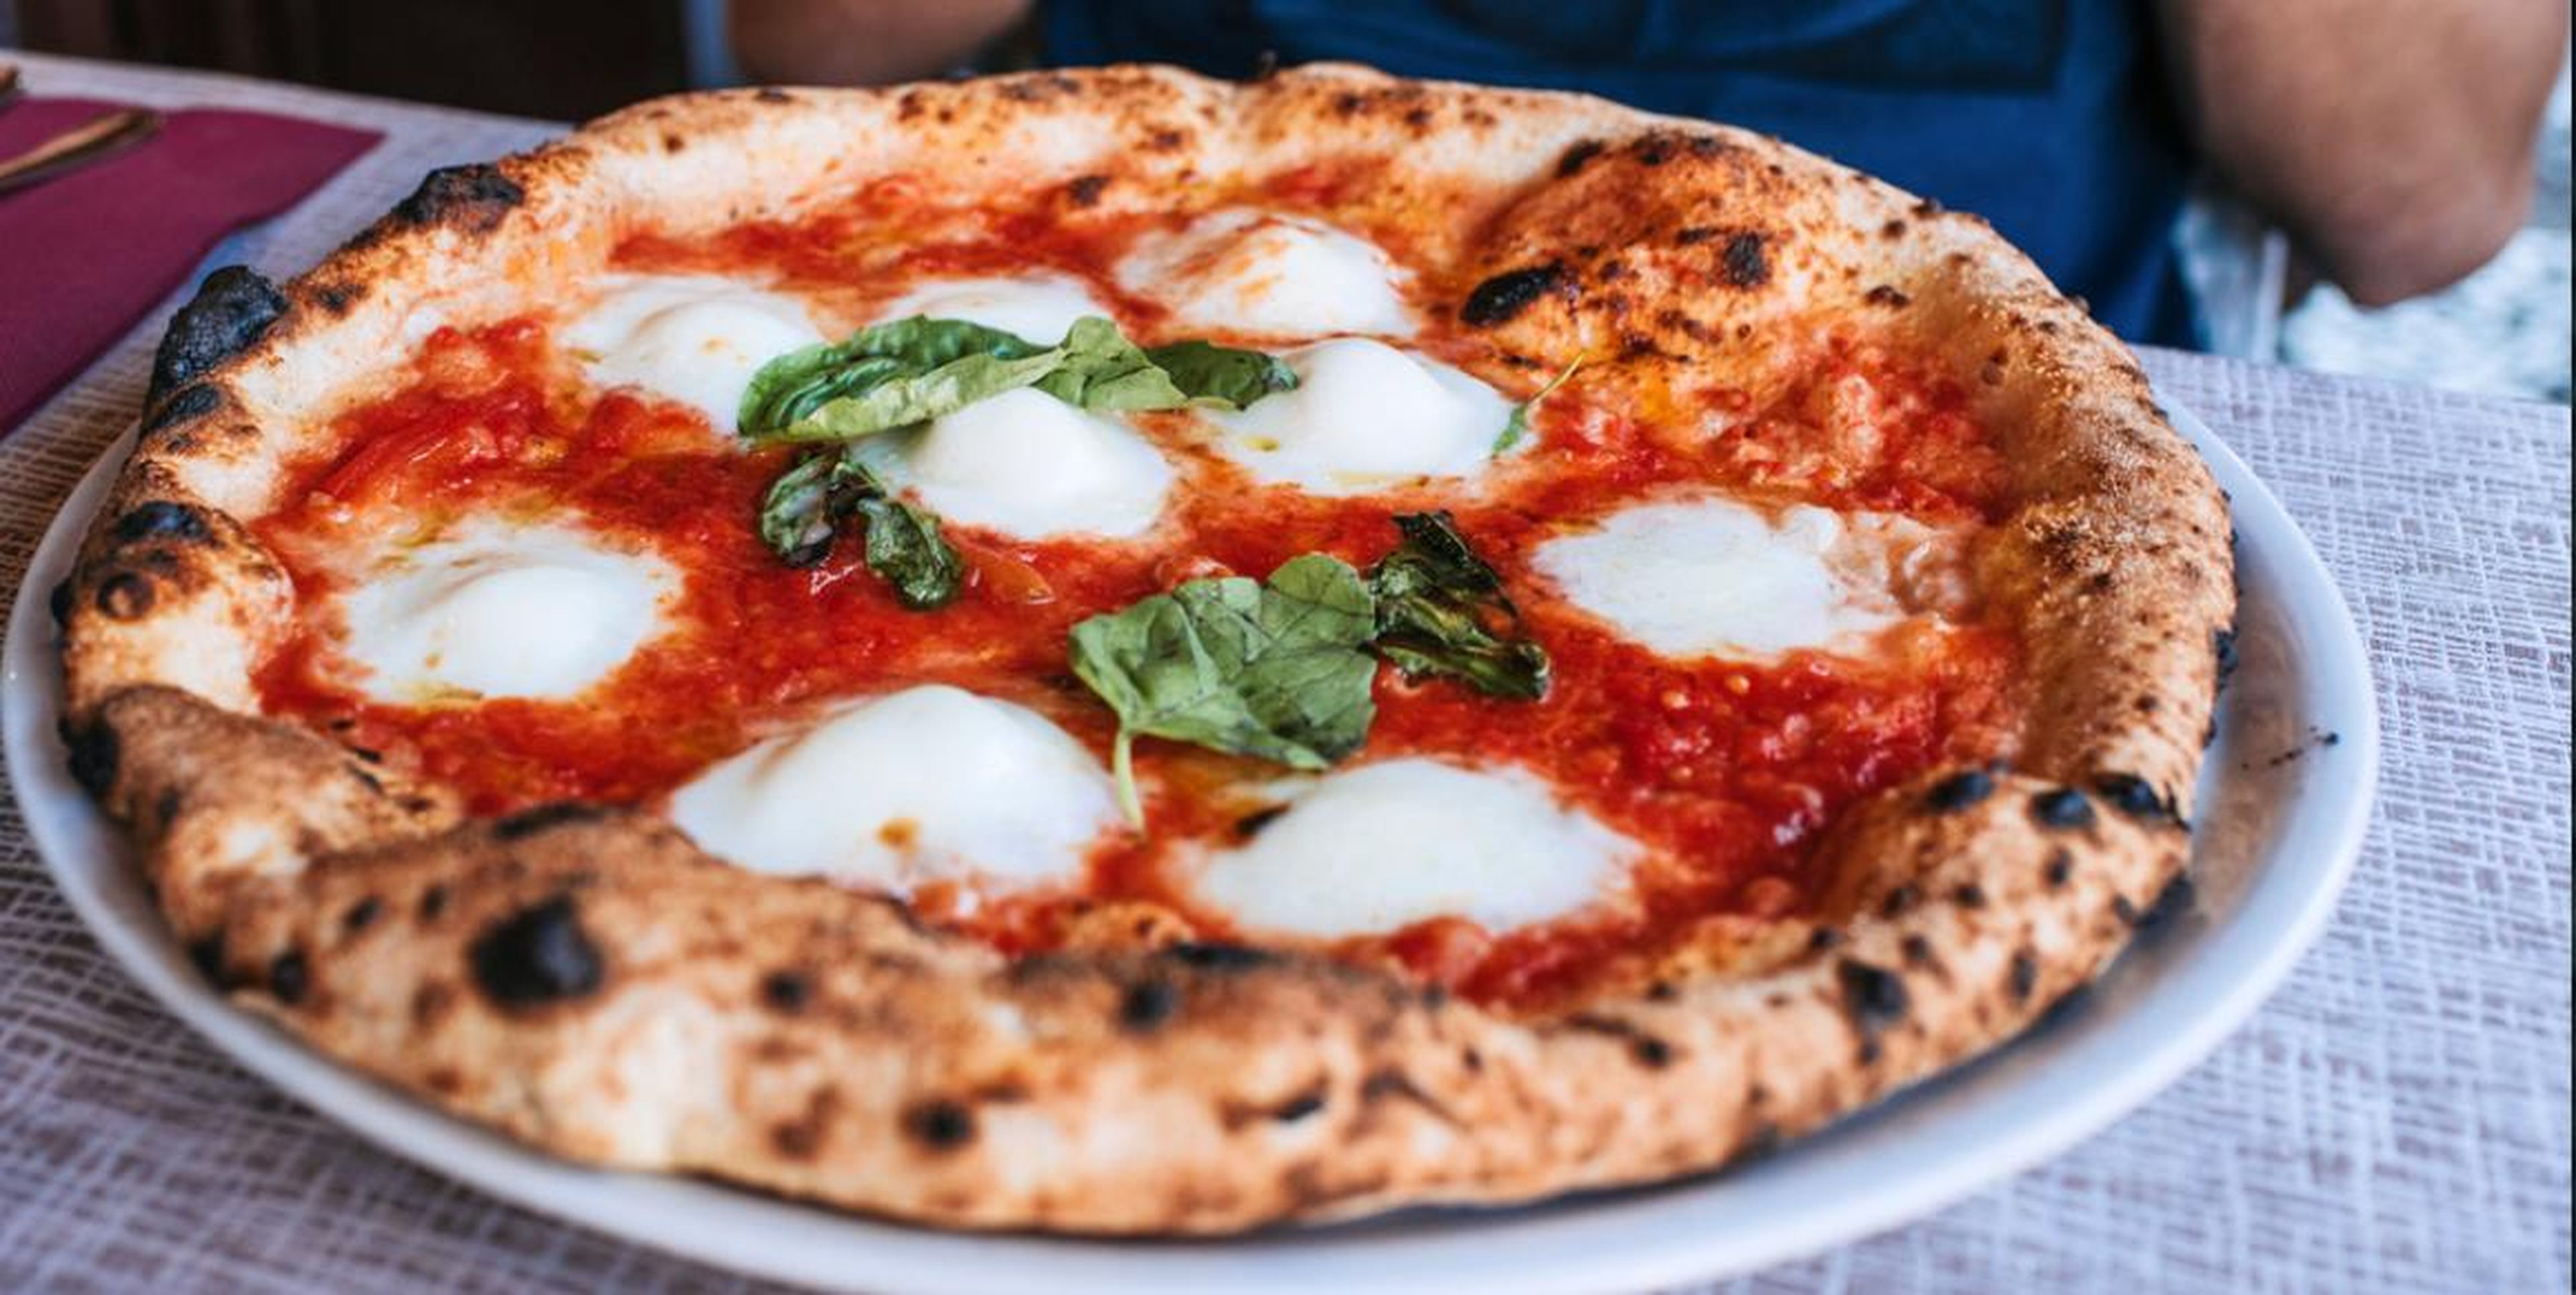 Chefs told Insider that certain dishes, like Margherita pizza, are usually overpriced.